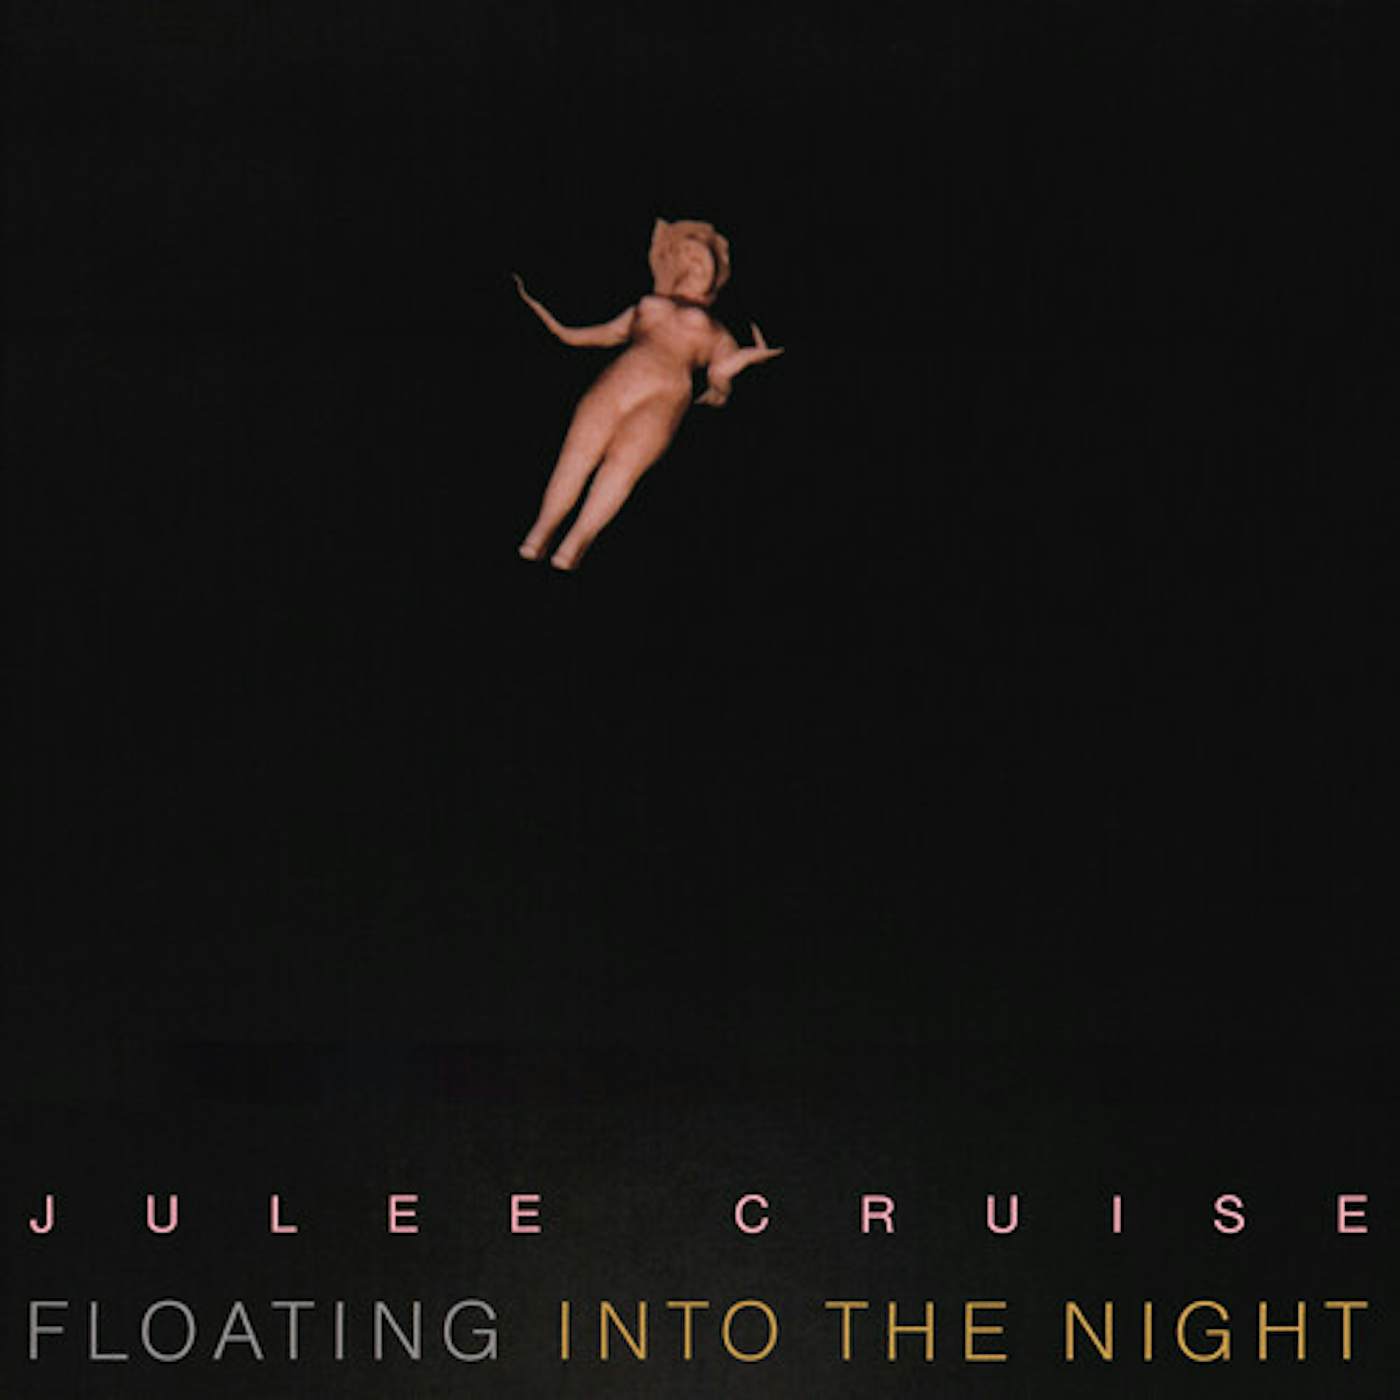 Julee Cruise FLOATING INTO THE NIGHT Vinyl Record